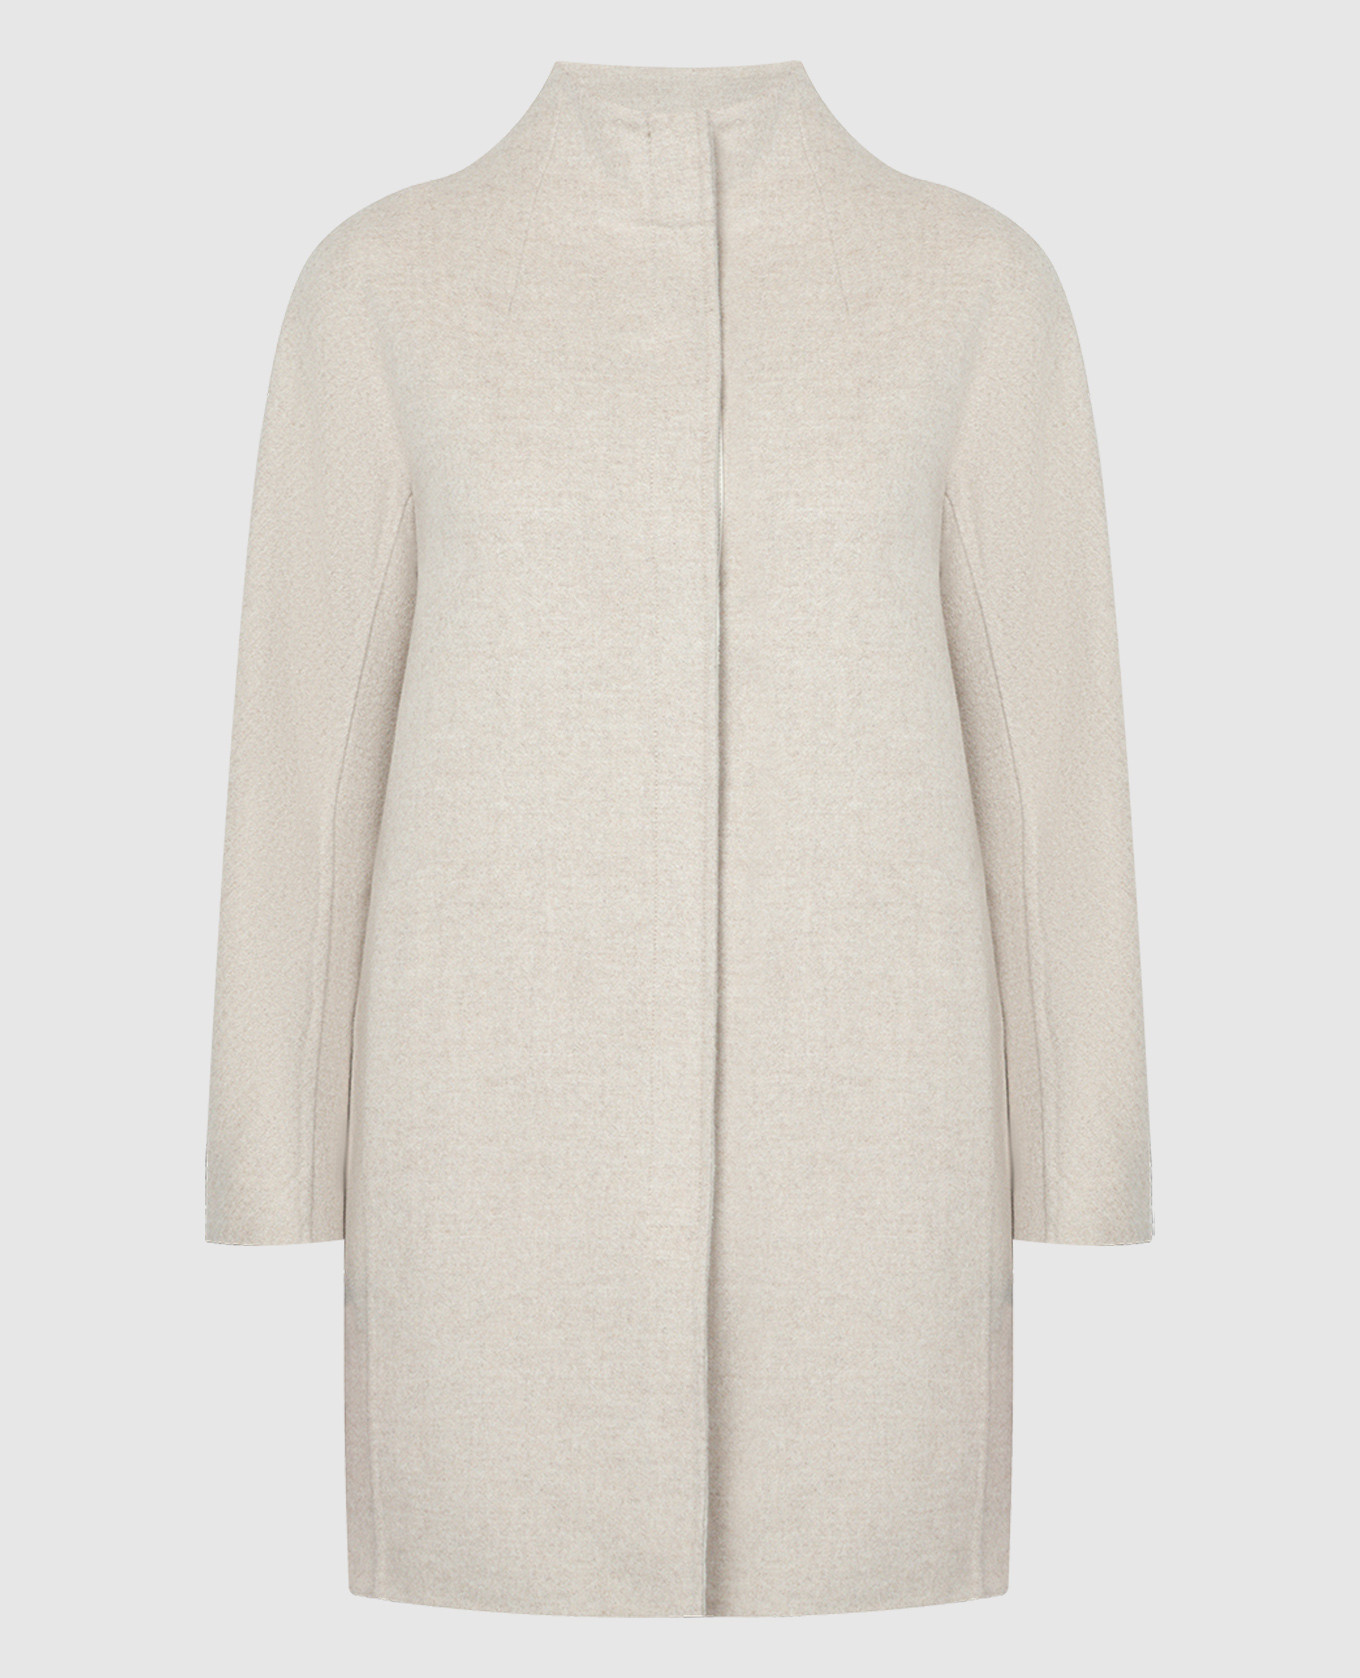 Beige straight cut wool and cashmere coat